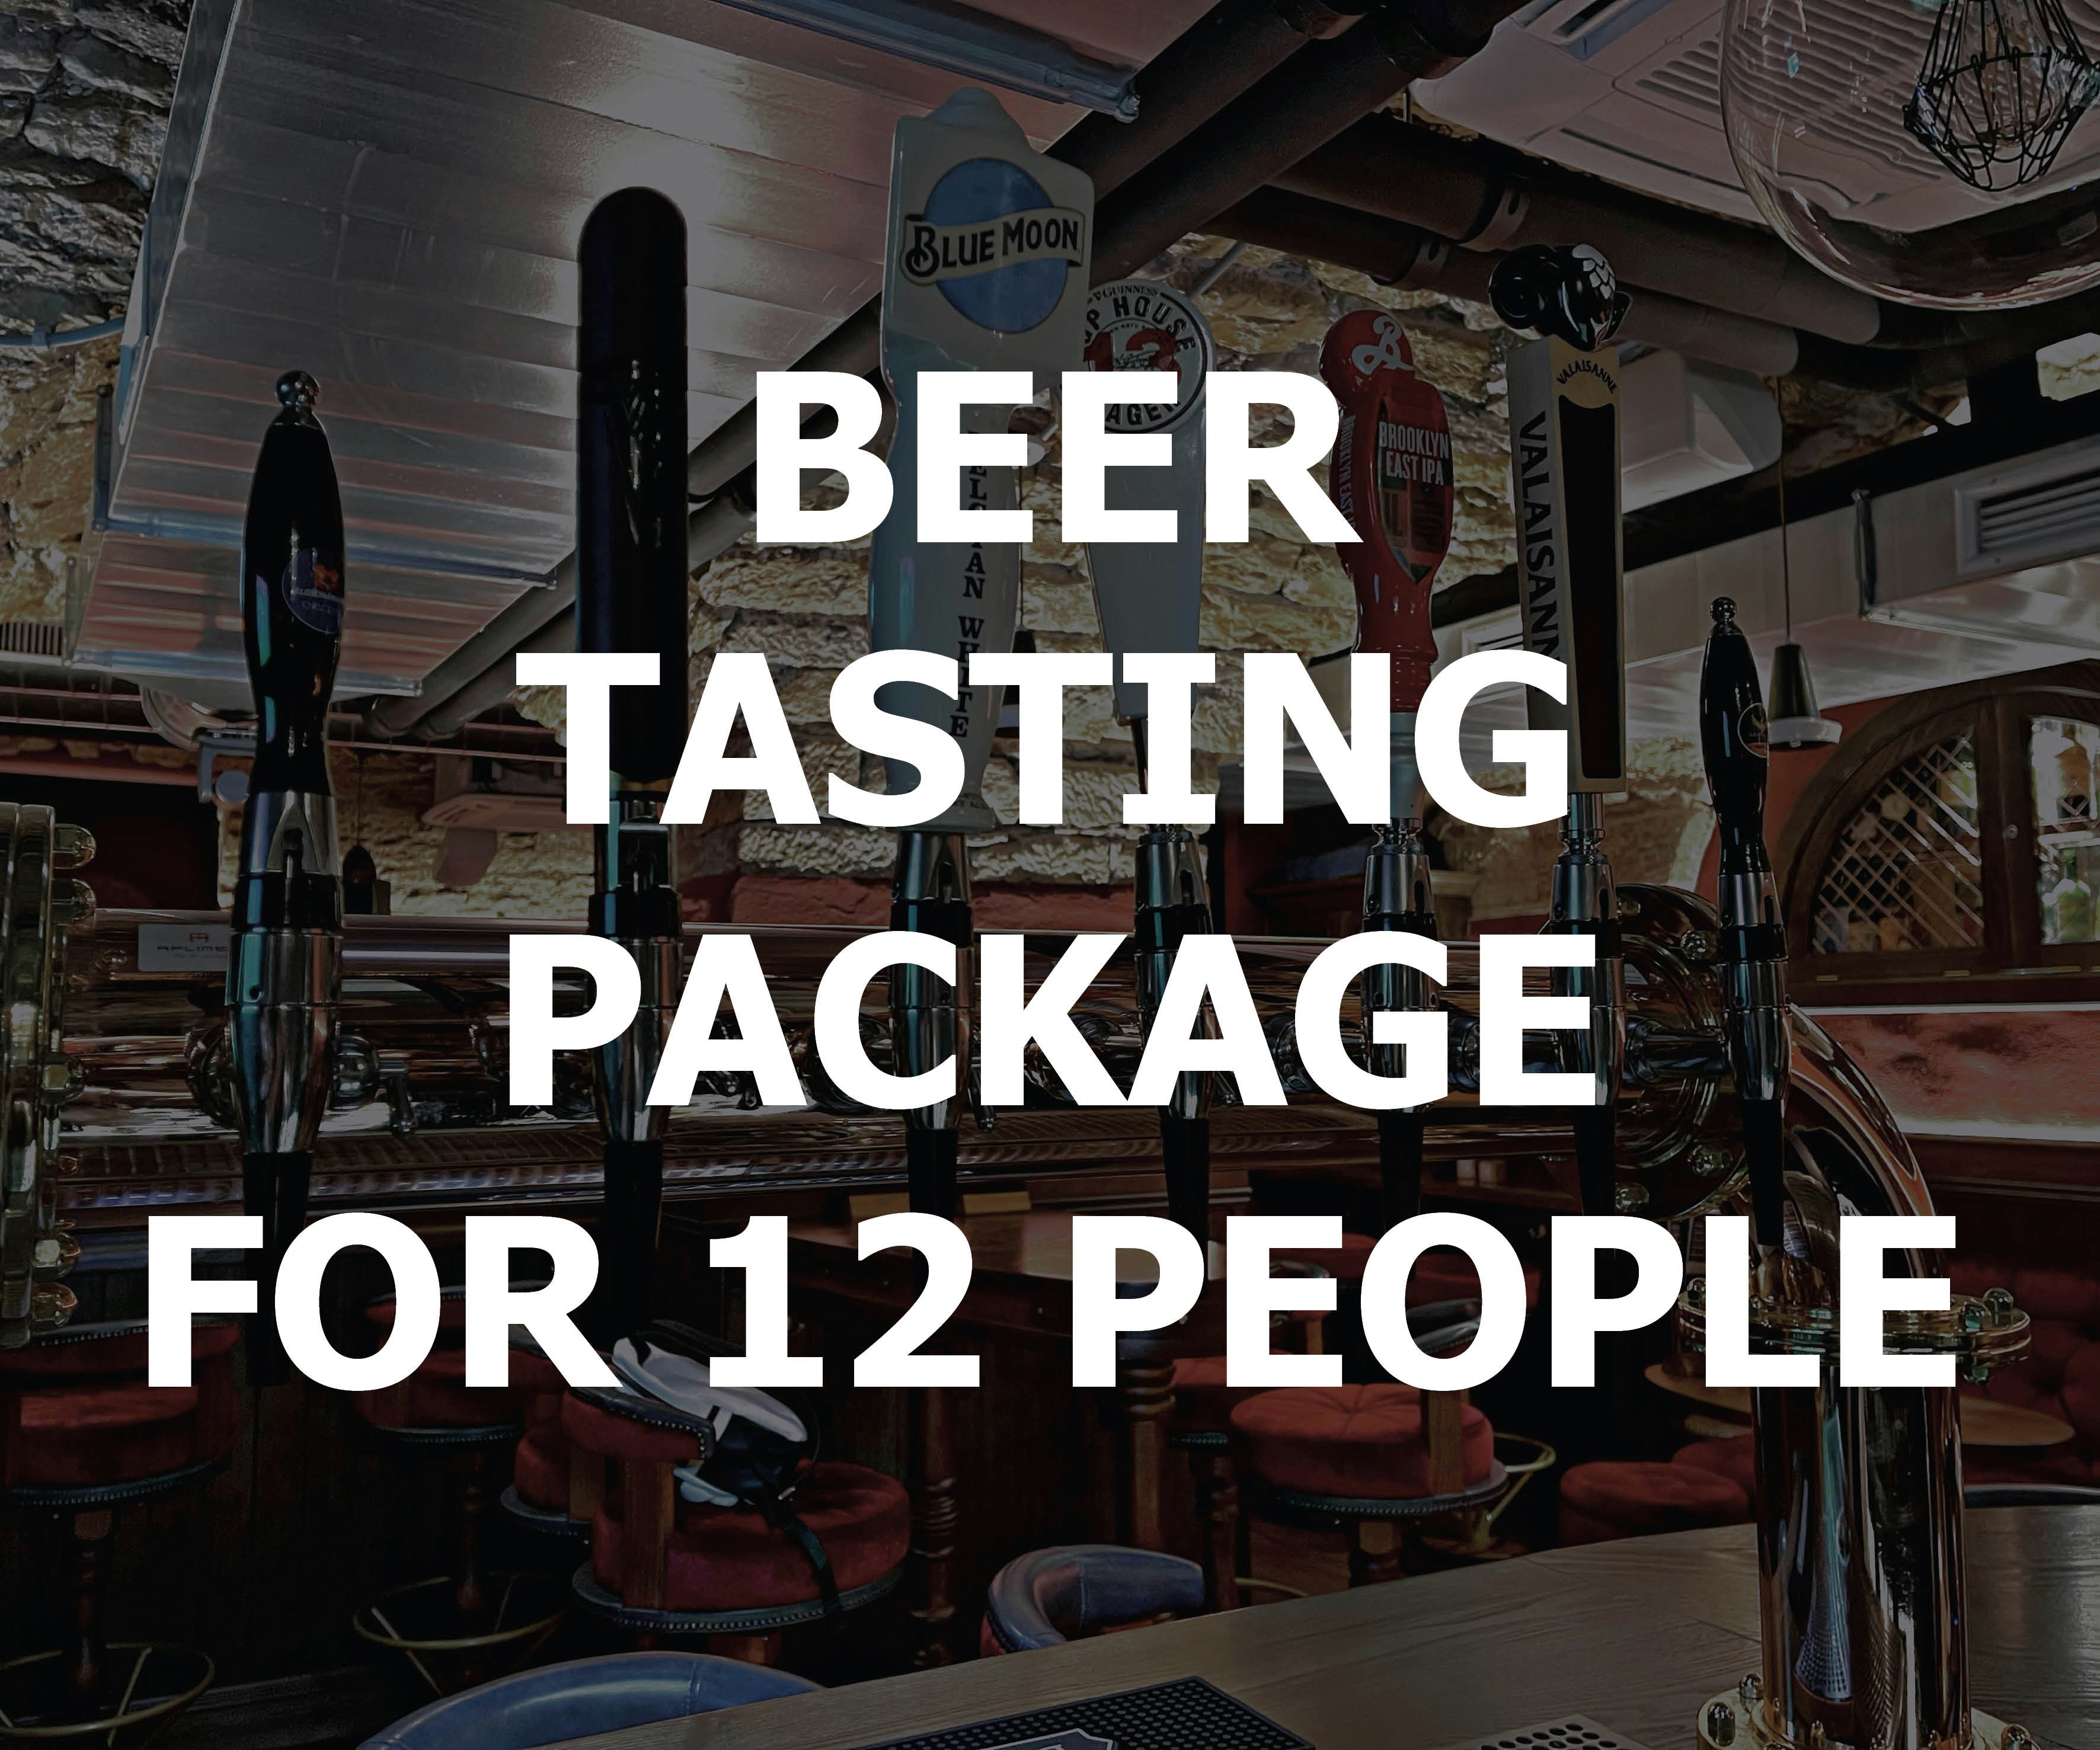 Beer tasting at The Auld Dubliner - package for 12 people